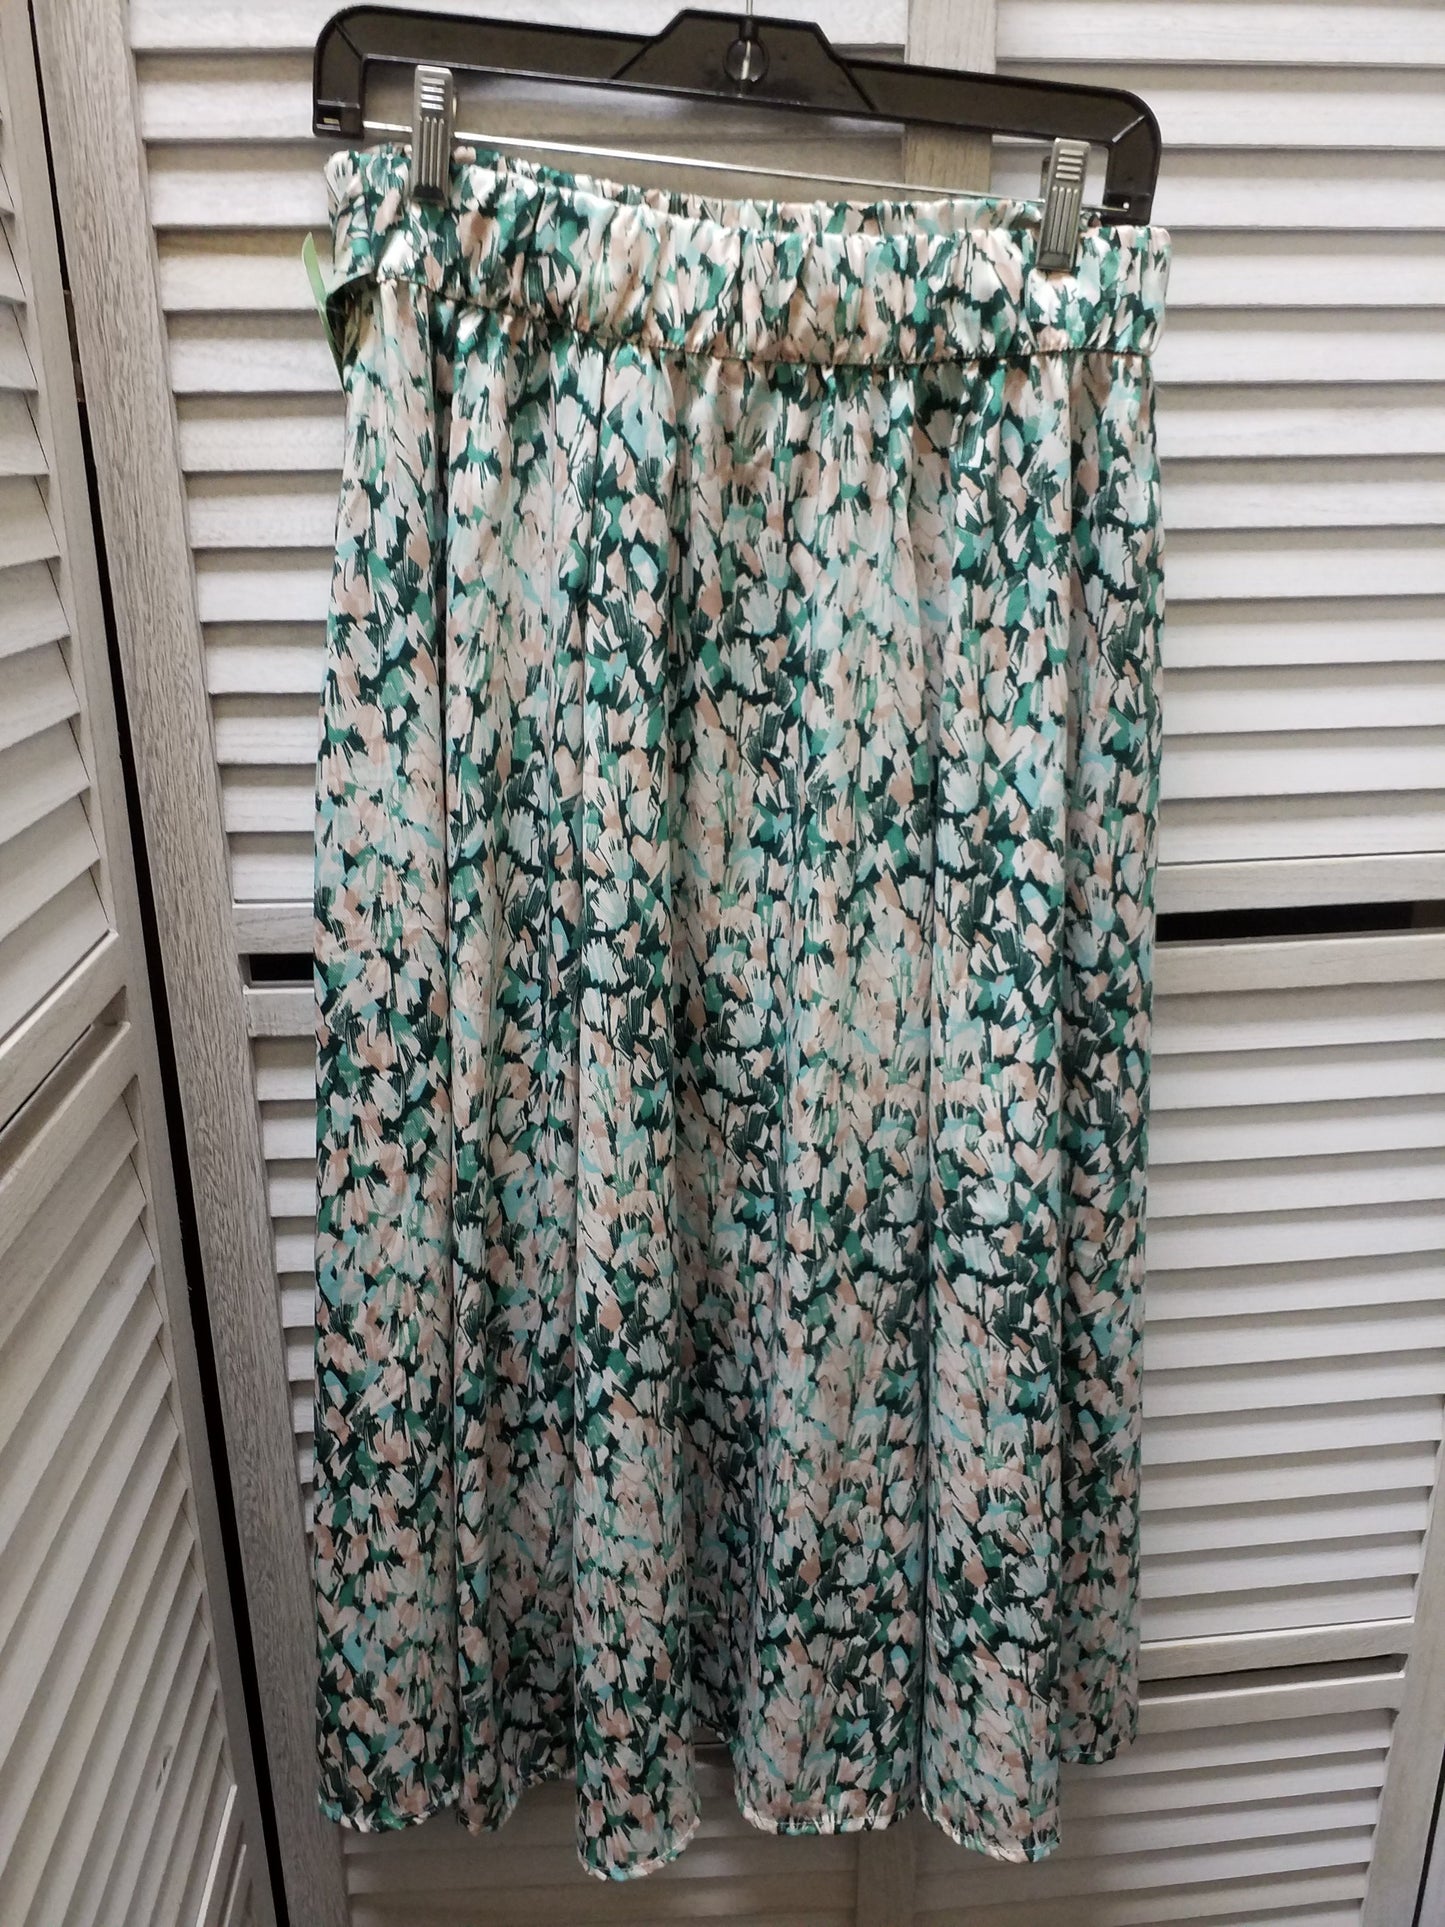 Skirt Maxi By H&m  Size: S